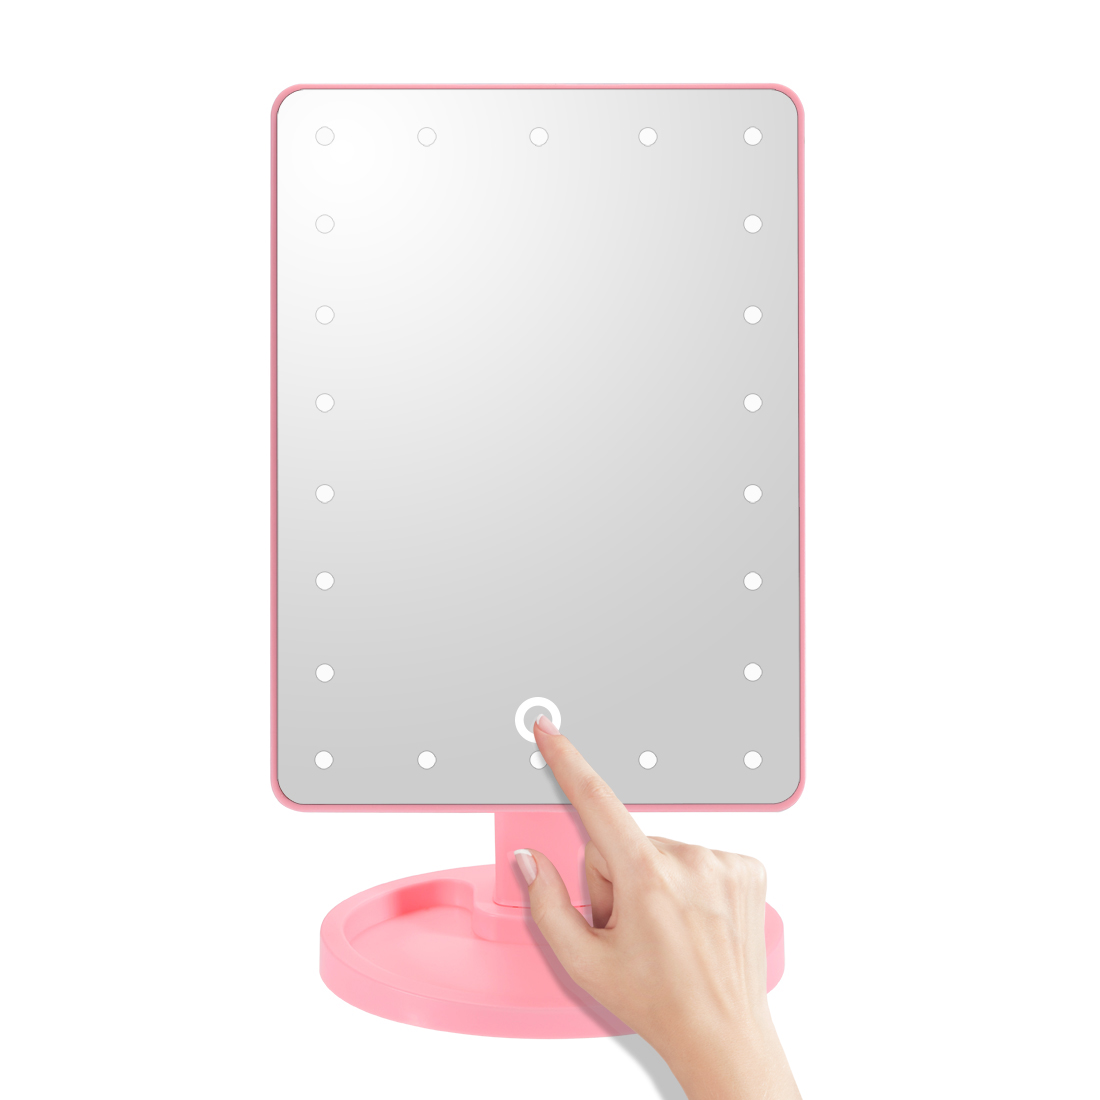 22 LED Touch Screen Makeup Mirror Tabletop Cosmetic Vanity Light Up Mirror - Pink